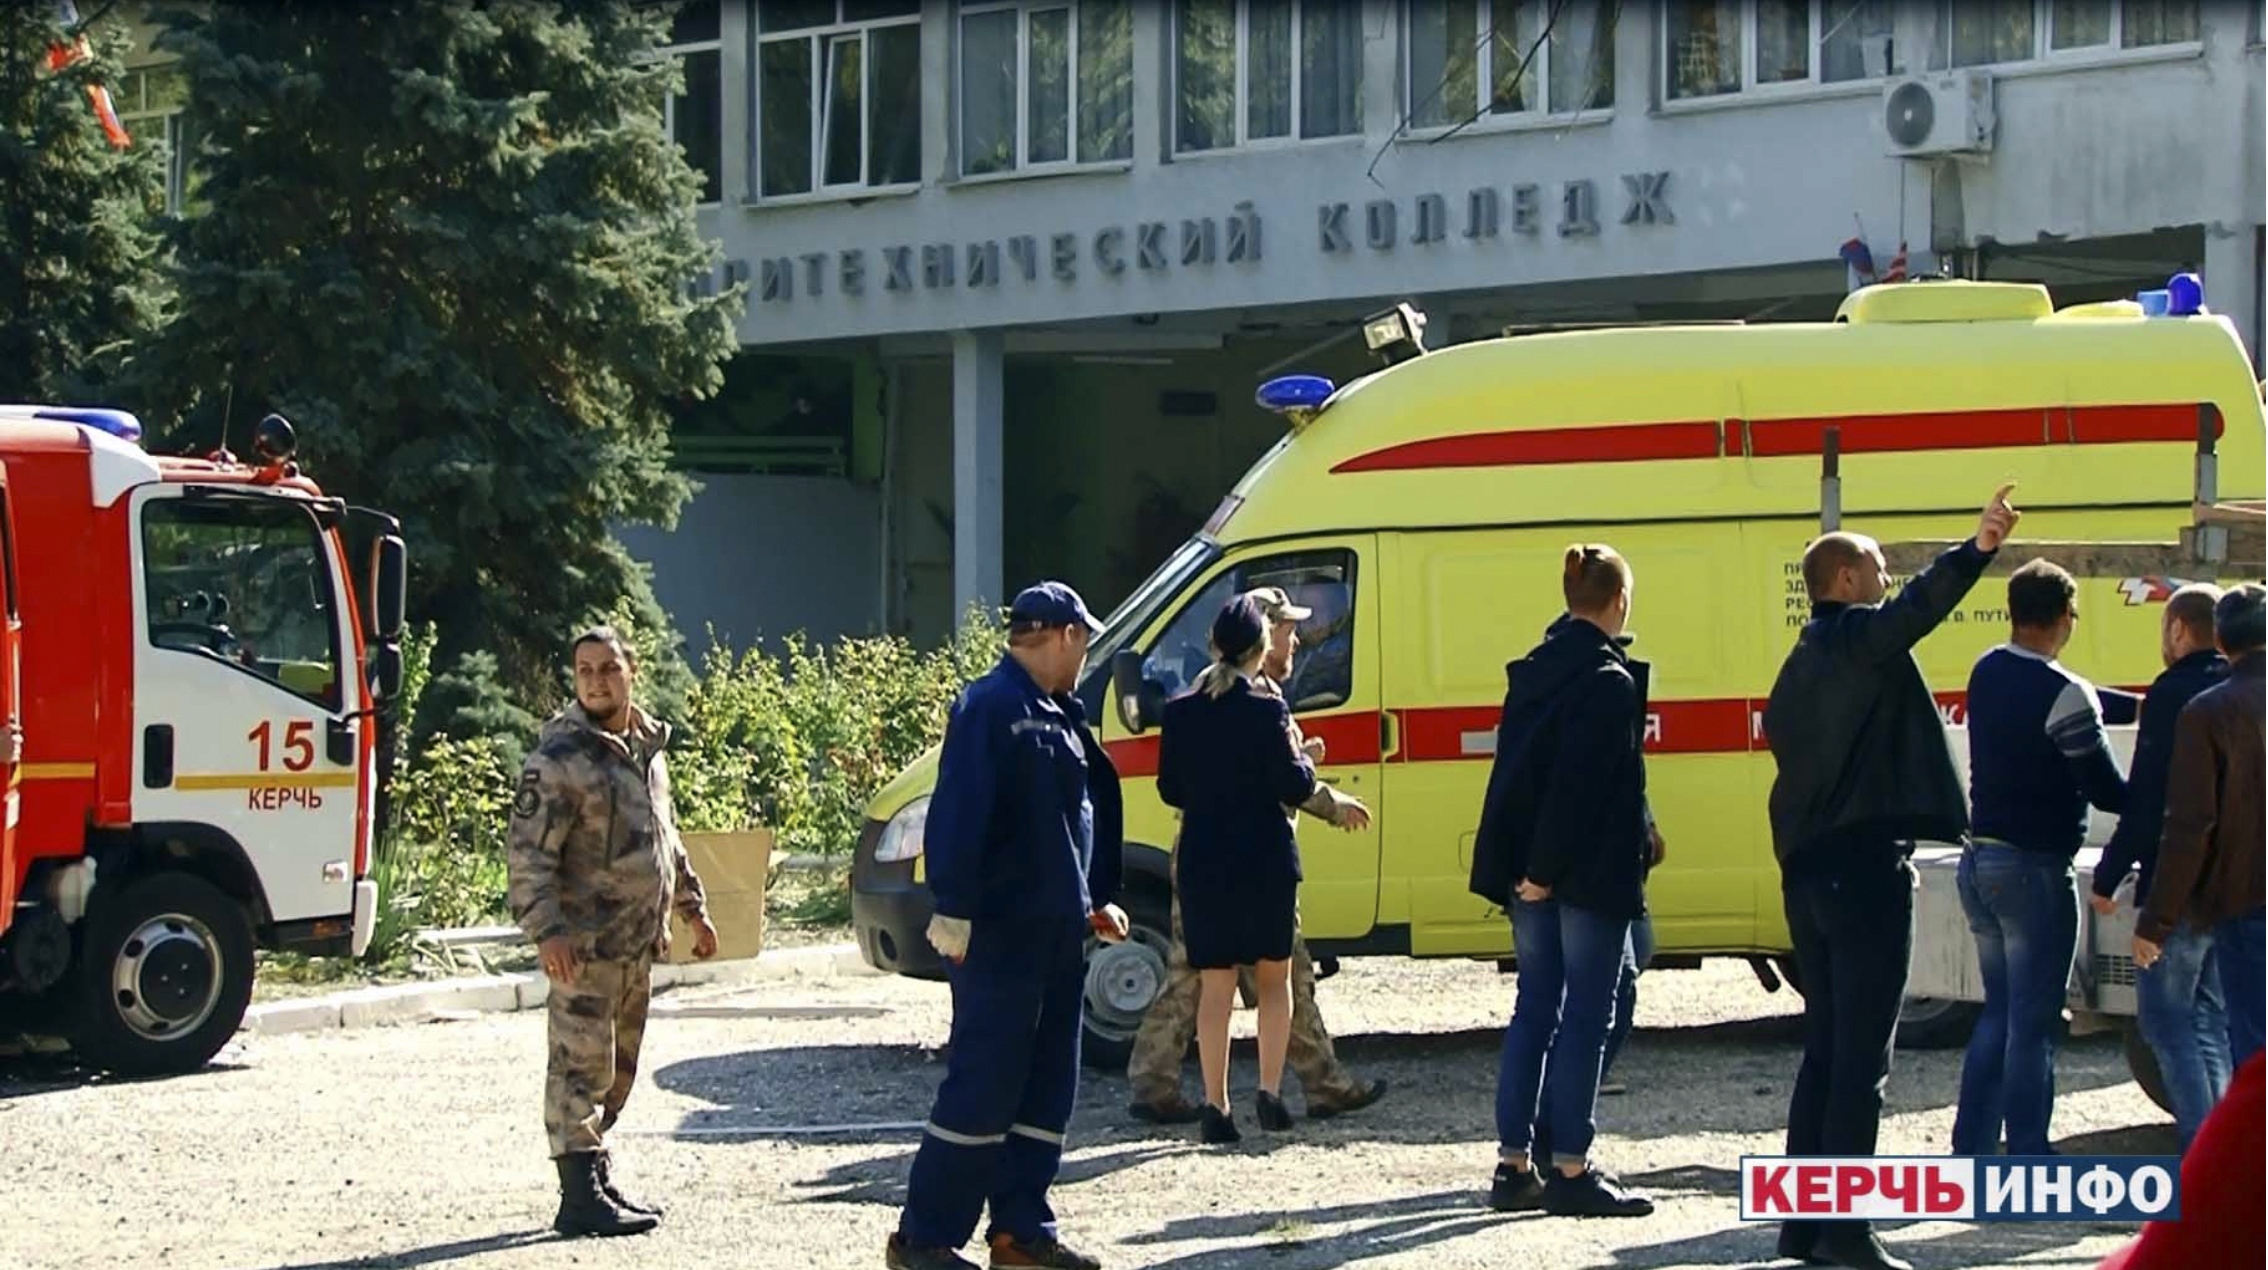 The scene outside the Kerch Polytechnic College on Wednesday.